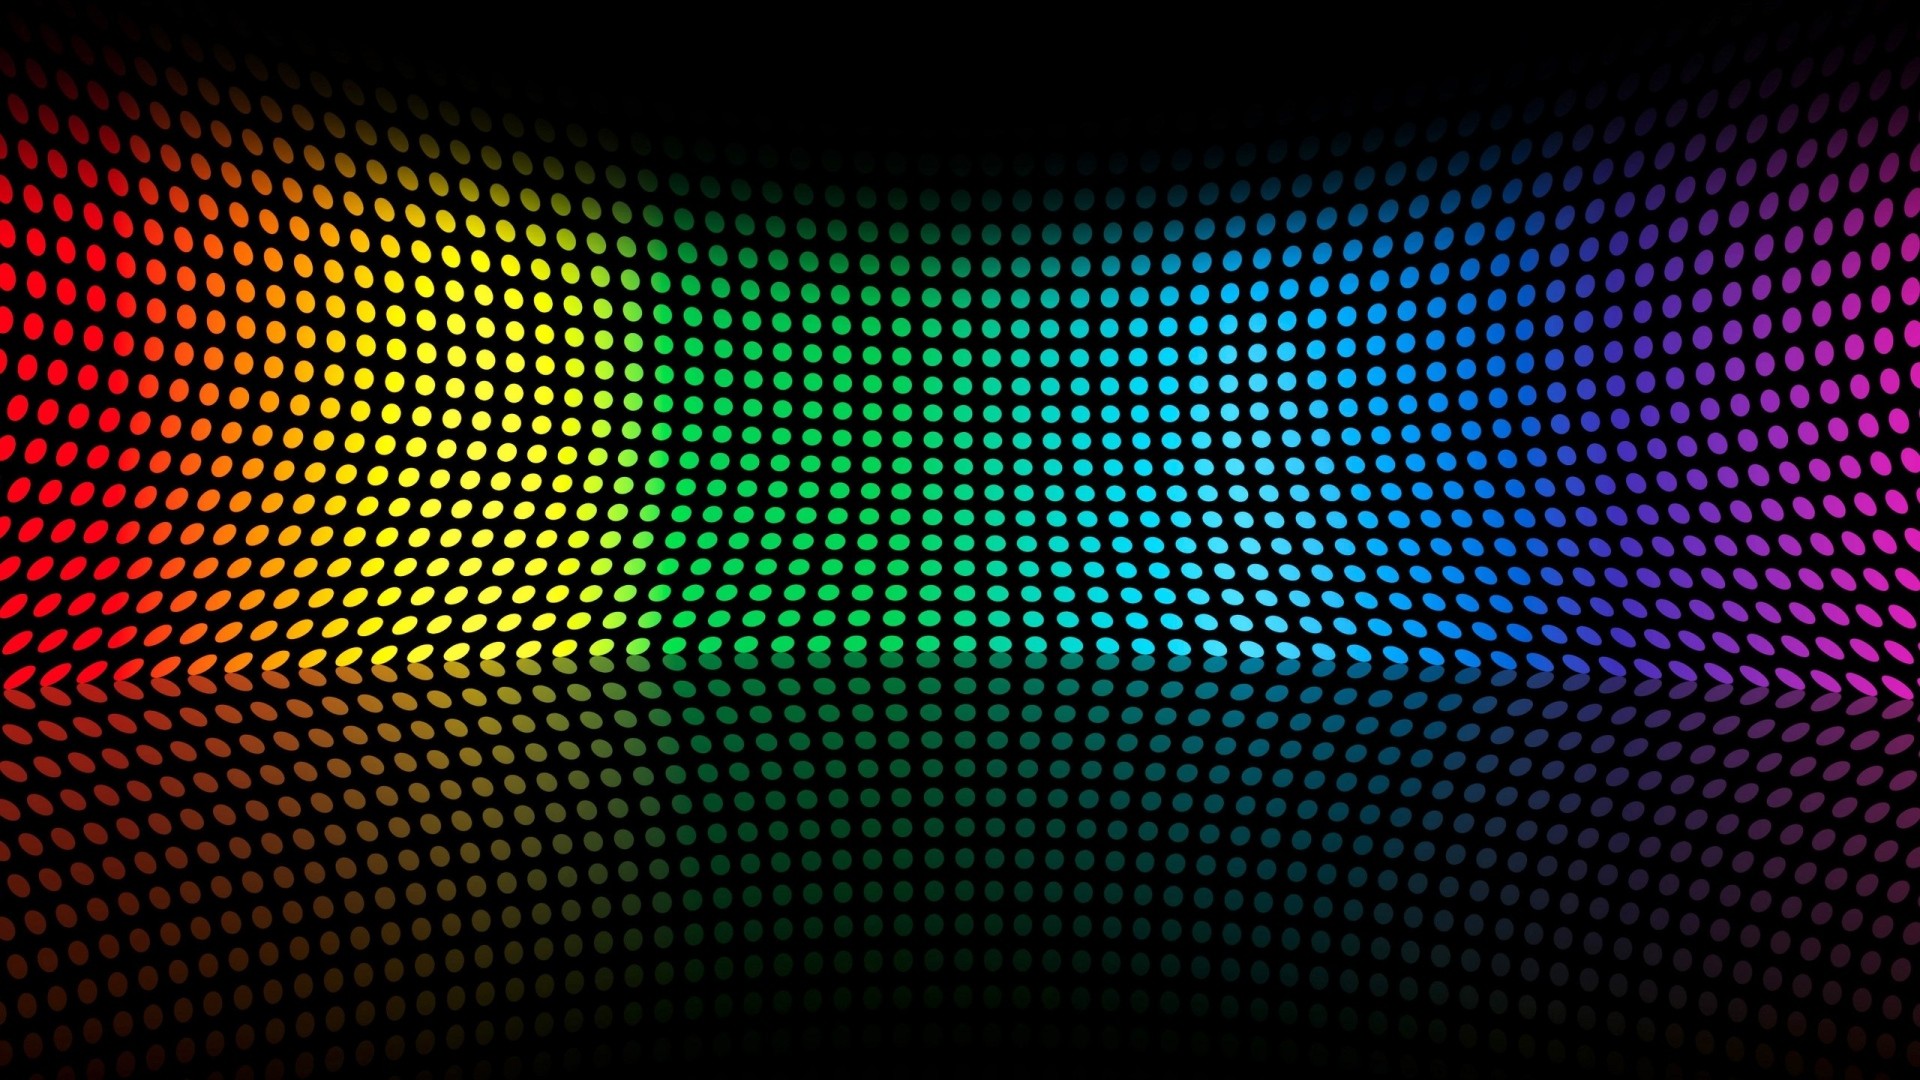 1920x1080 HD Background Colorful Curved Disco Light Bending Pattern Wallpaper .